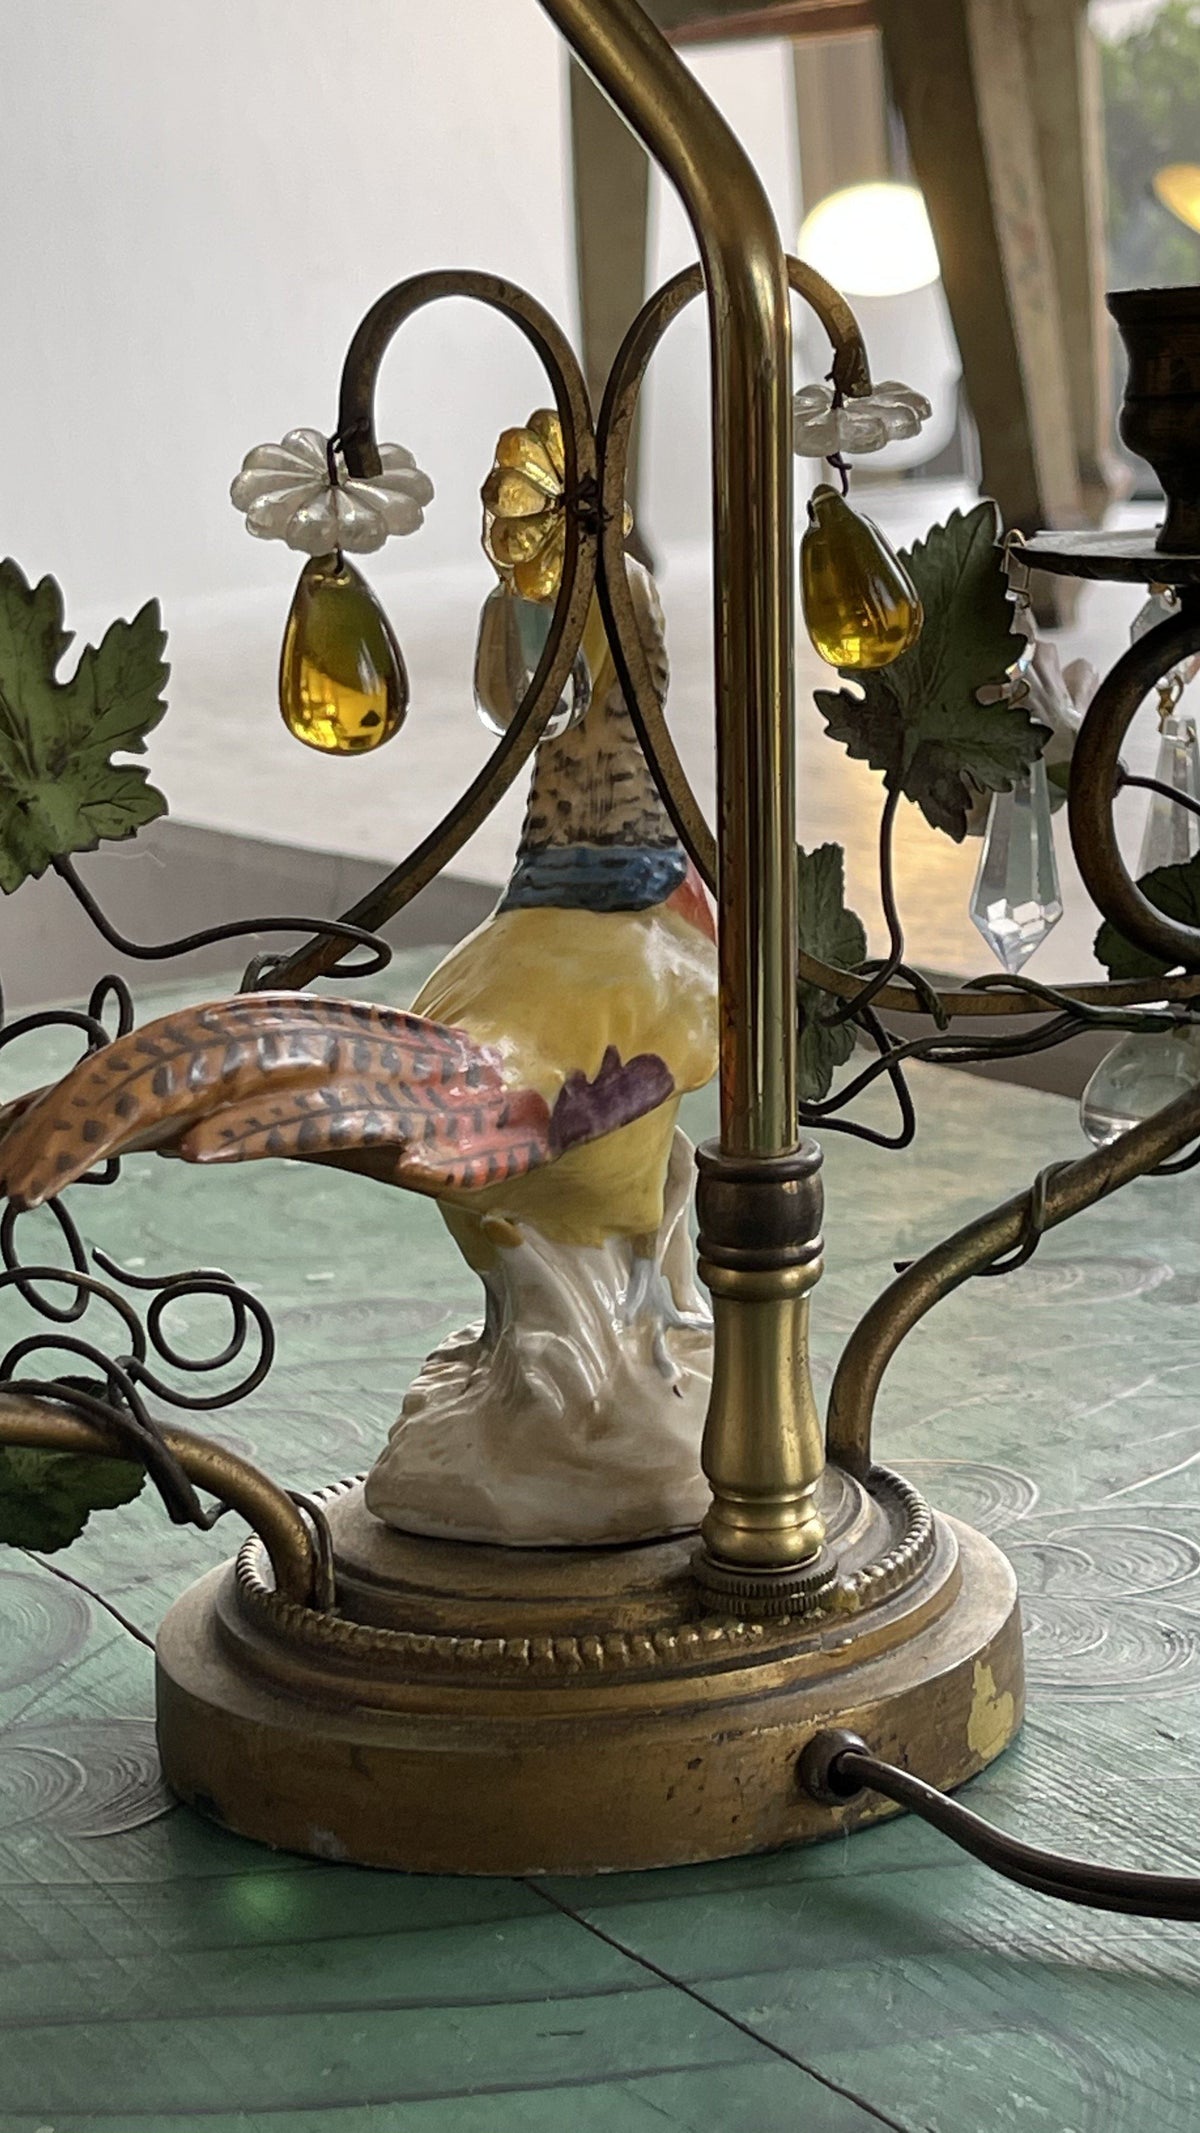 Lamp - FRENCH BOUILLOTTE LAMP WITH PORCELAIN PHEASANT